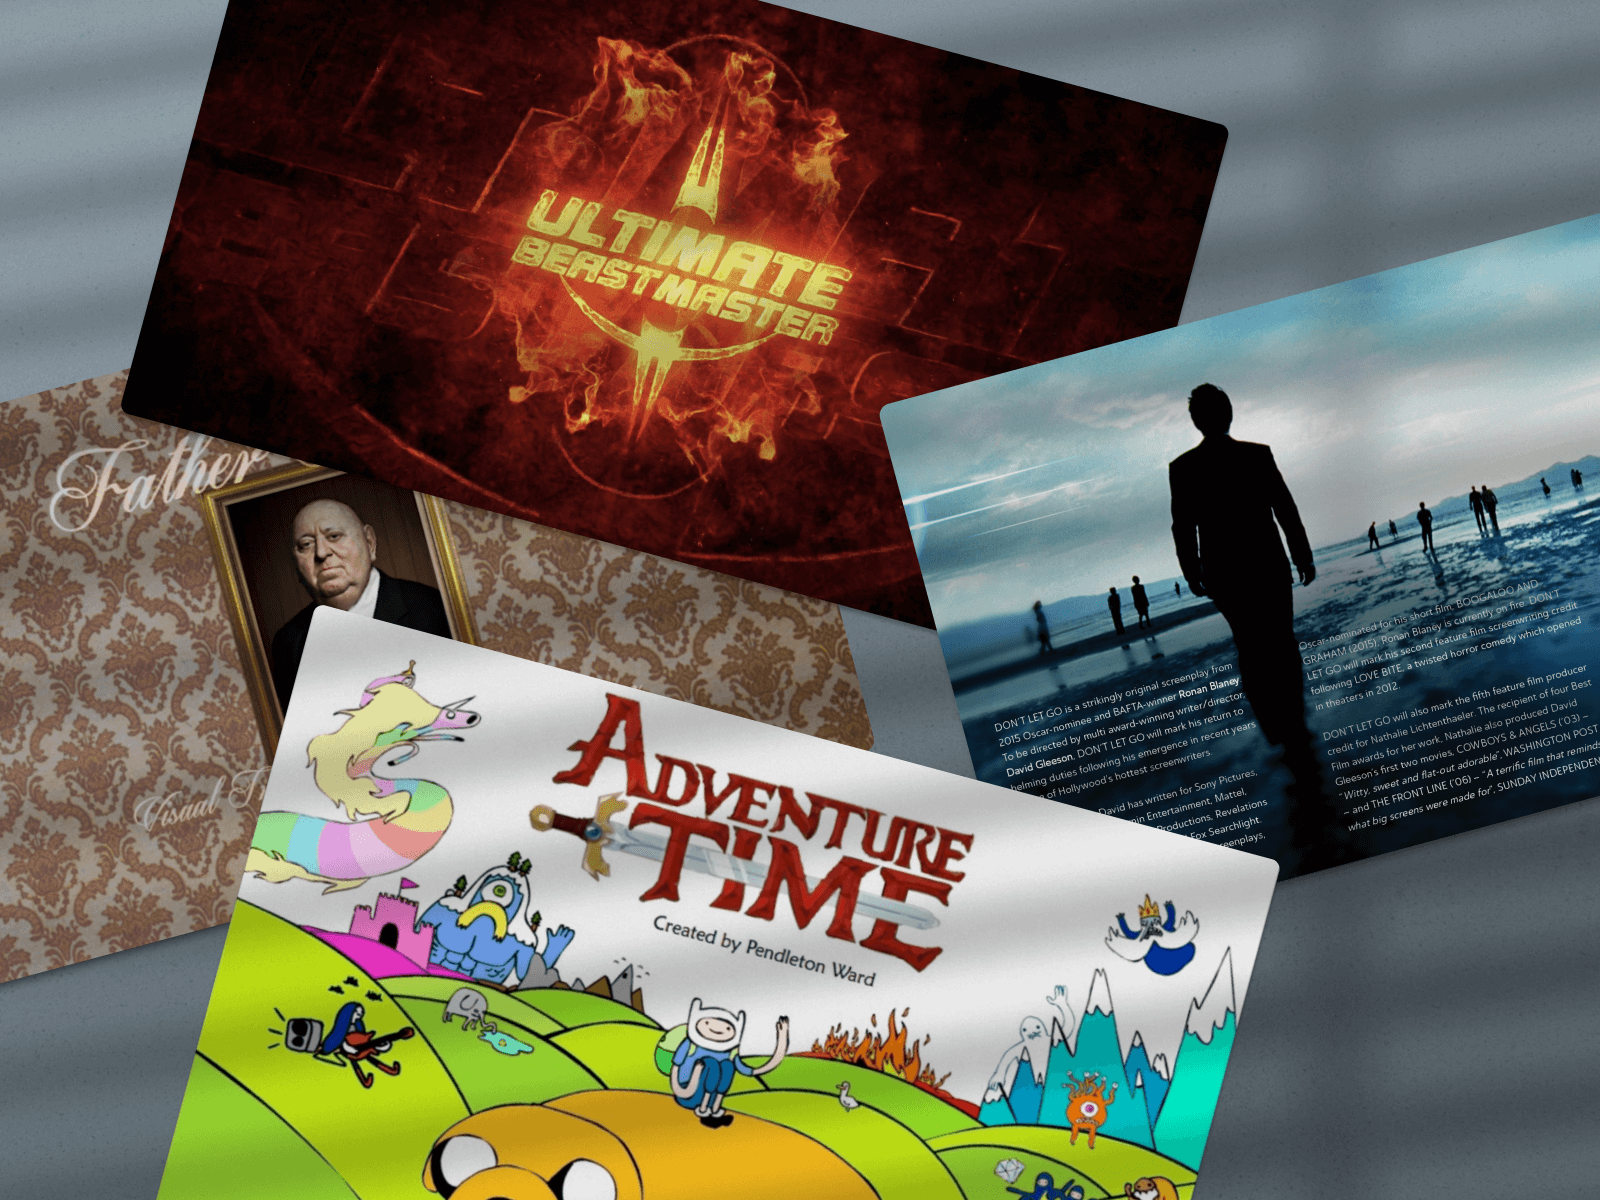 Examples of film pitch decks & TV show bibles